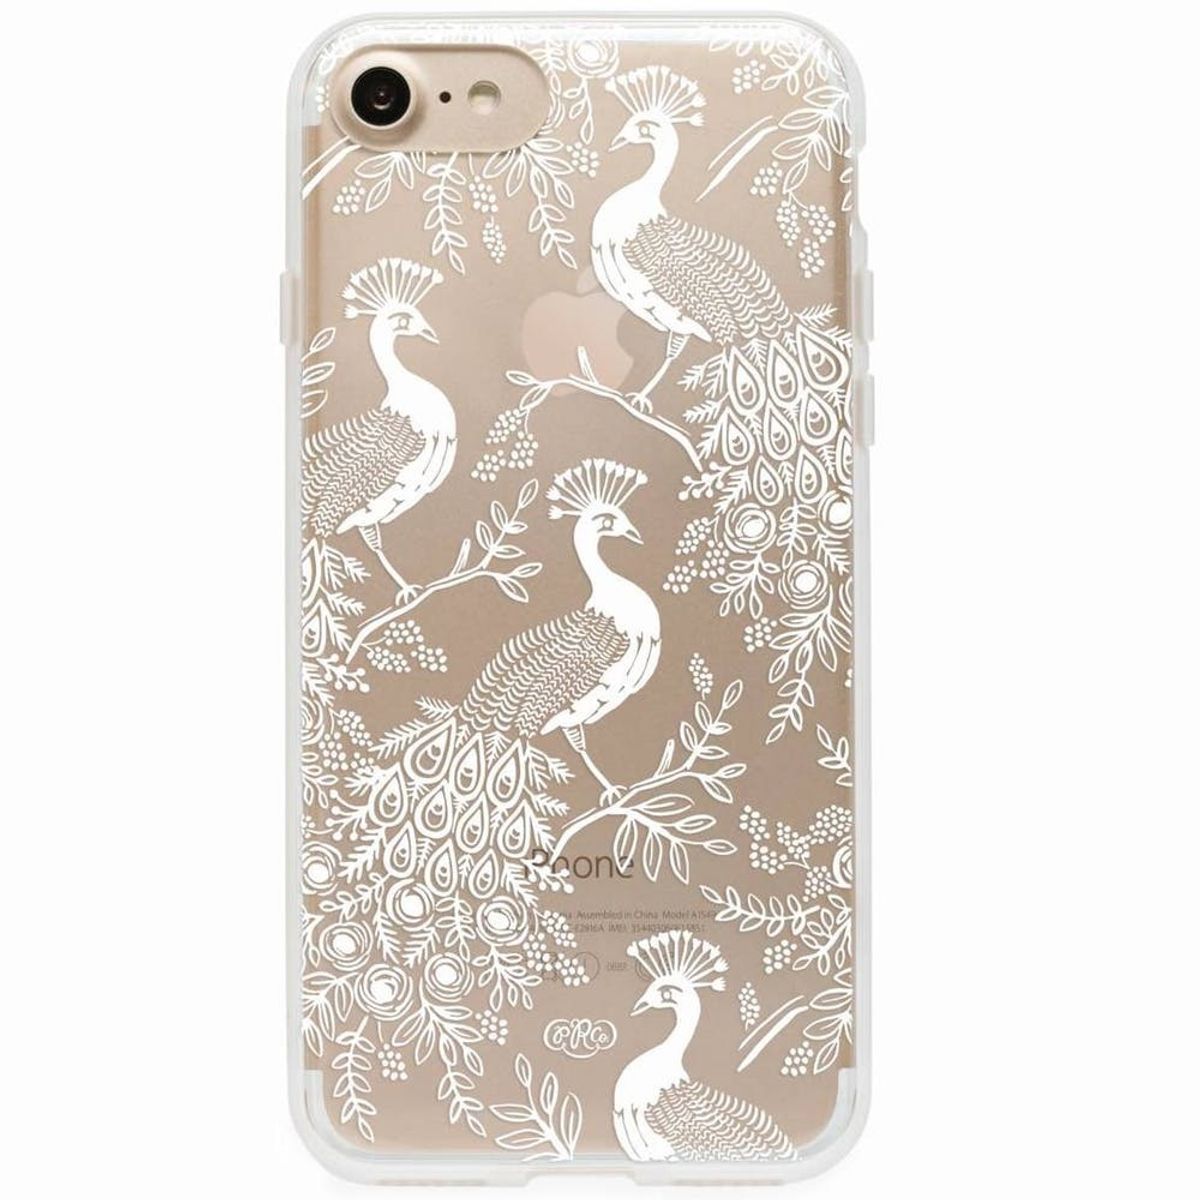 13 Gorgeous Phone Cases to Make Your Tech the Belle of the Ball